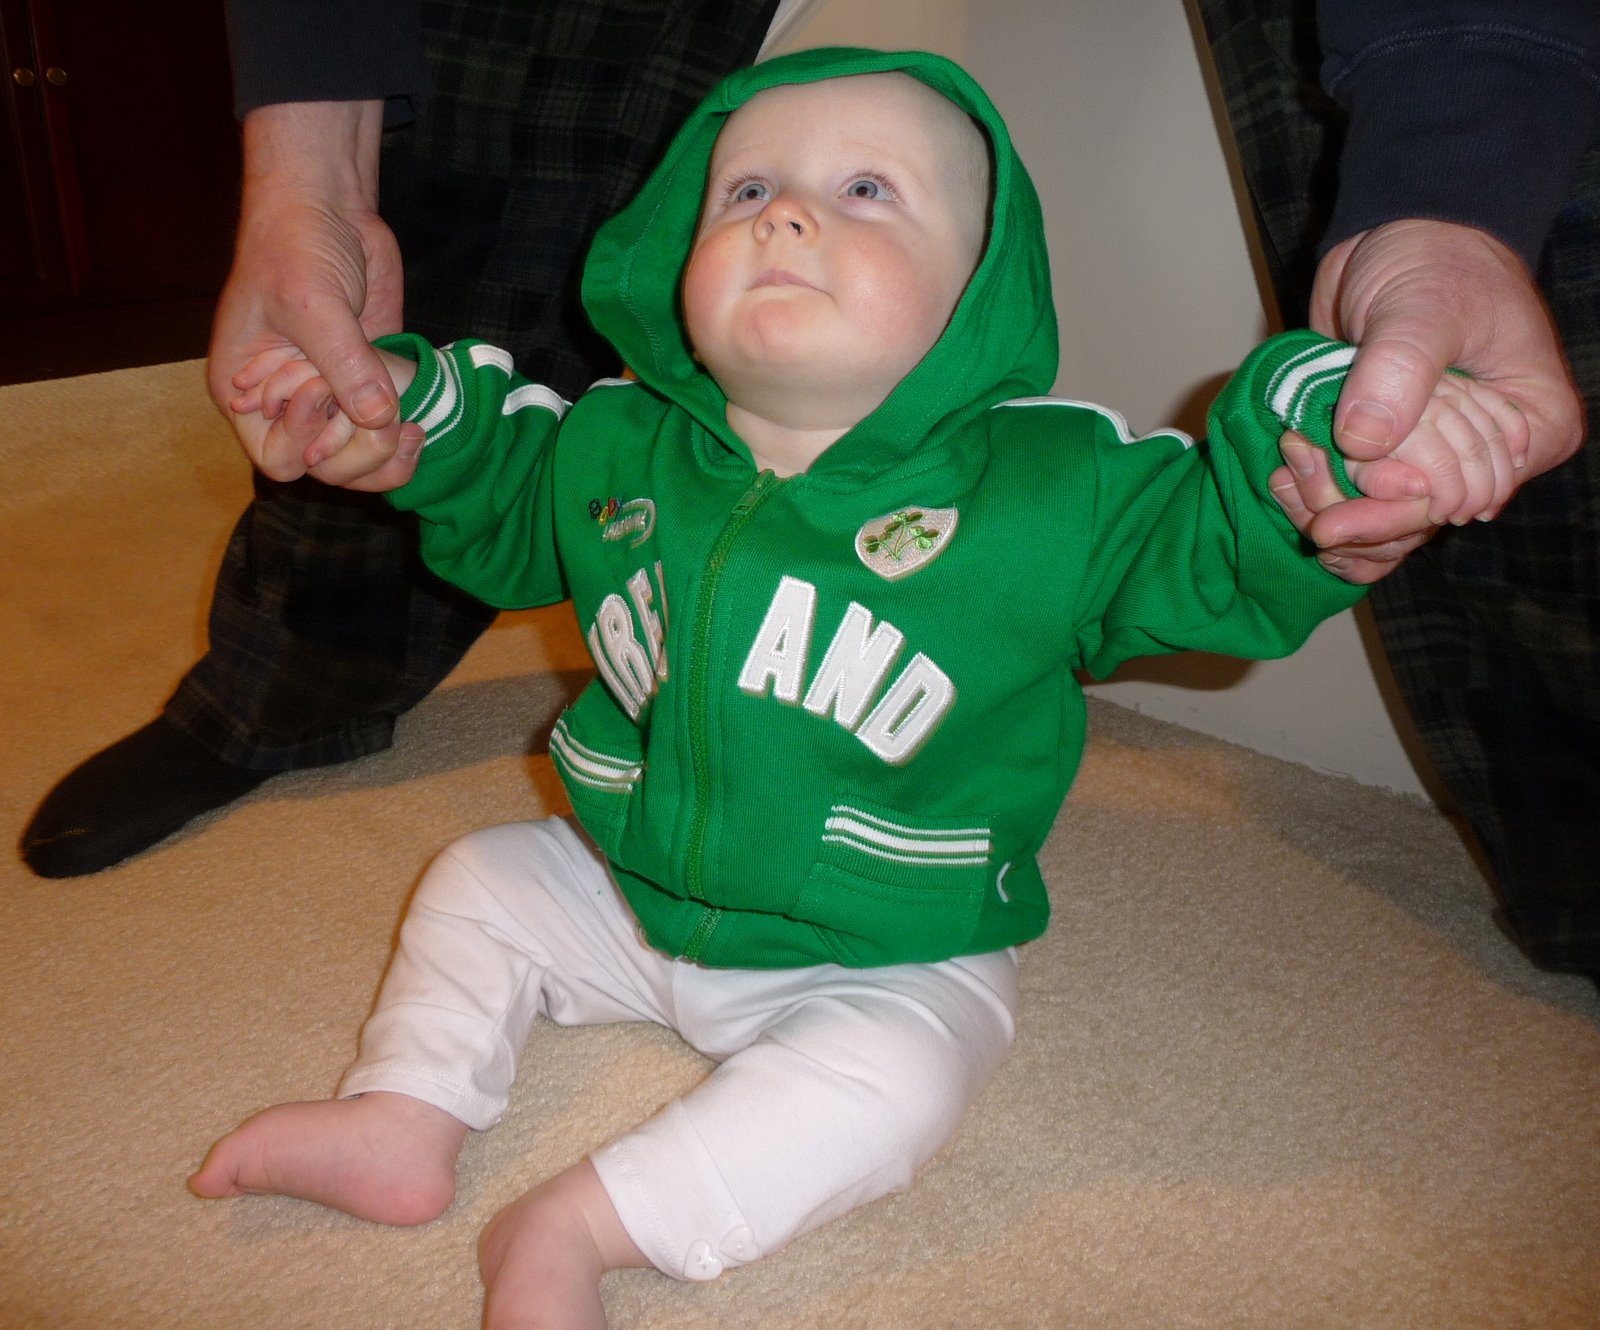 Our baby dressed for the North Texas Irish Festival